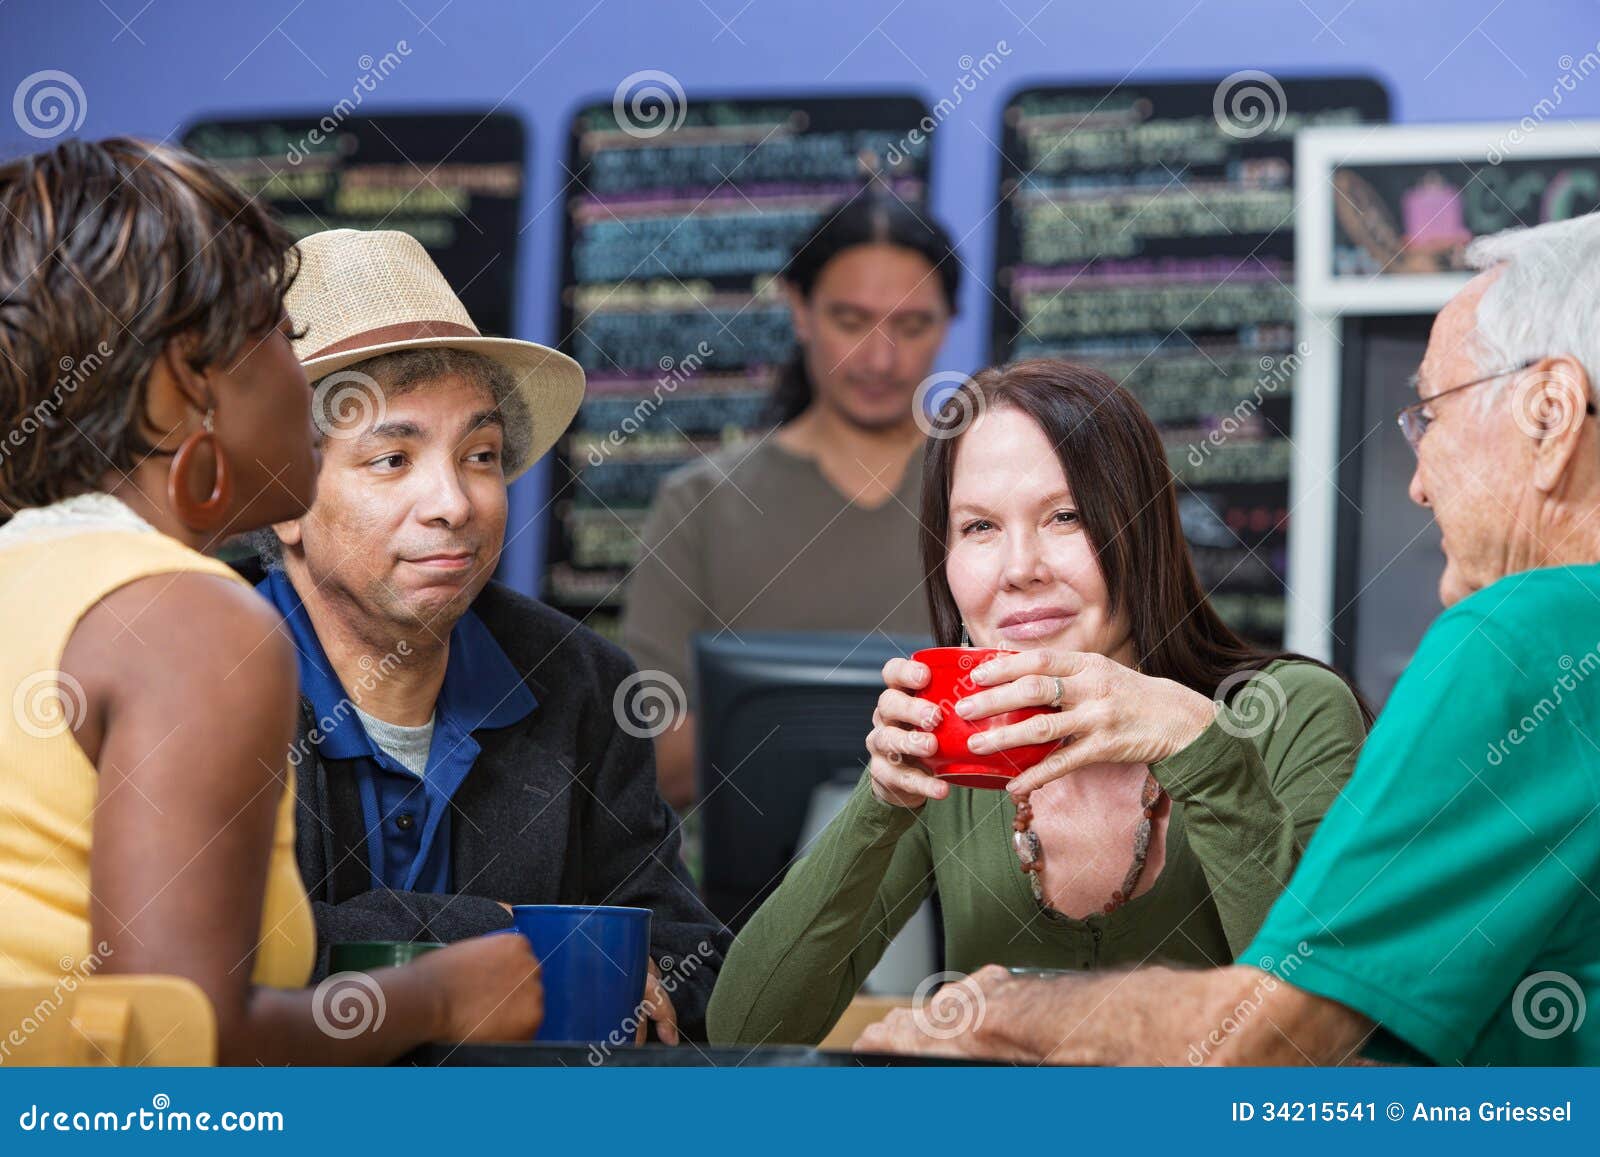 glad woman with friends in cafe